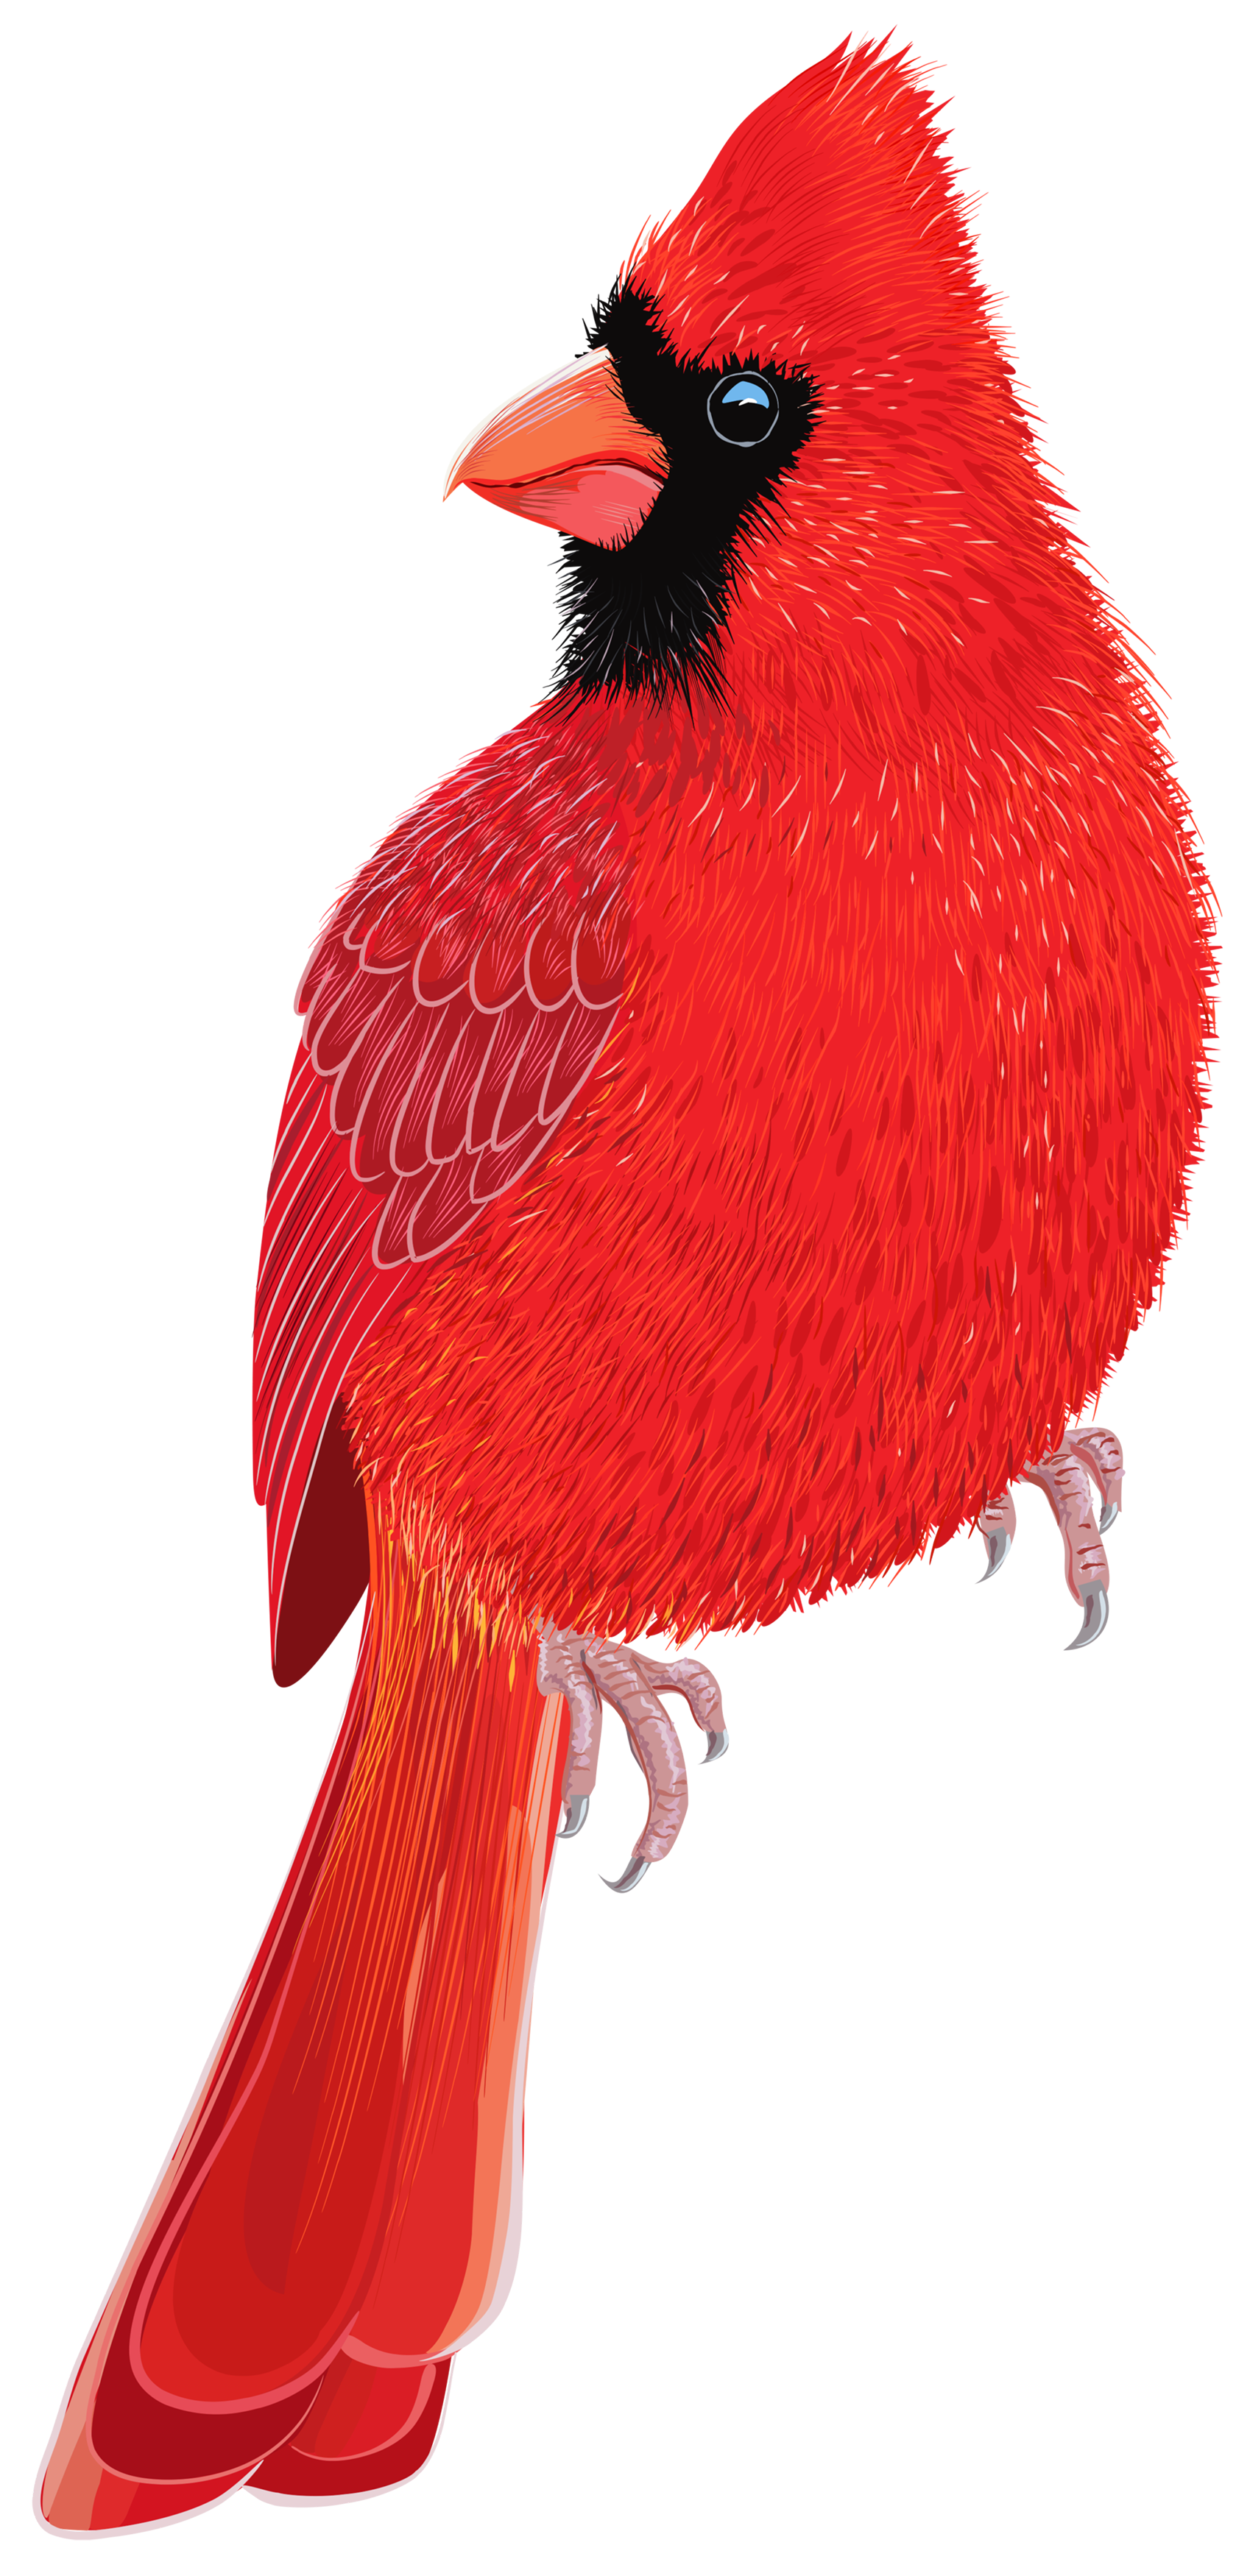 Red Bird PNG Clipart IMage - Best WEB Clipart